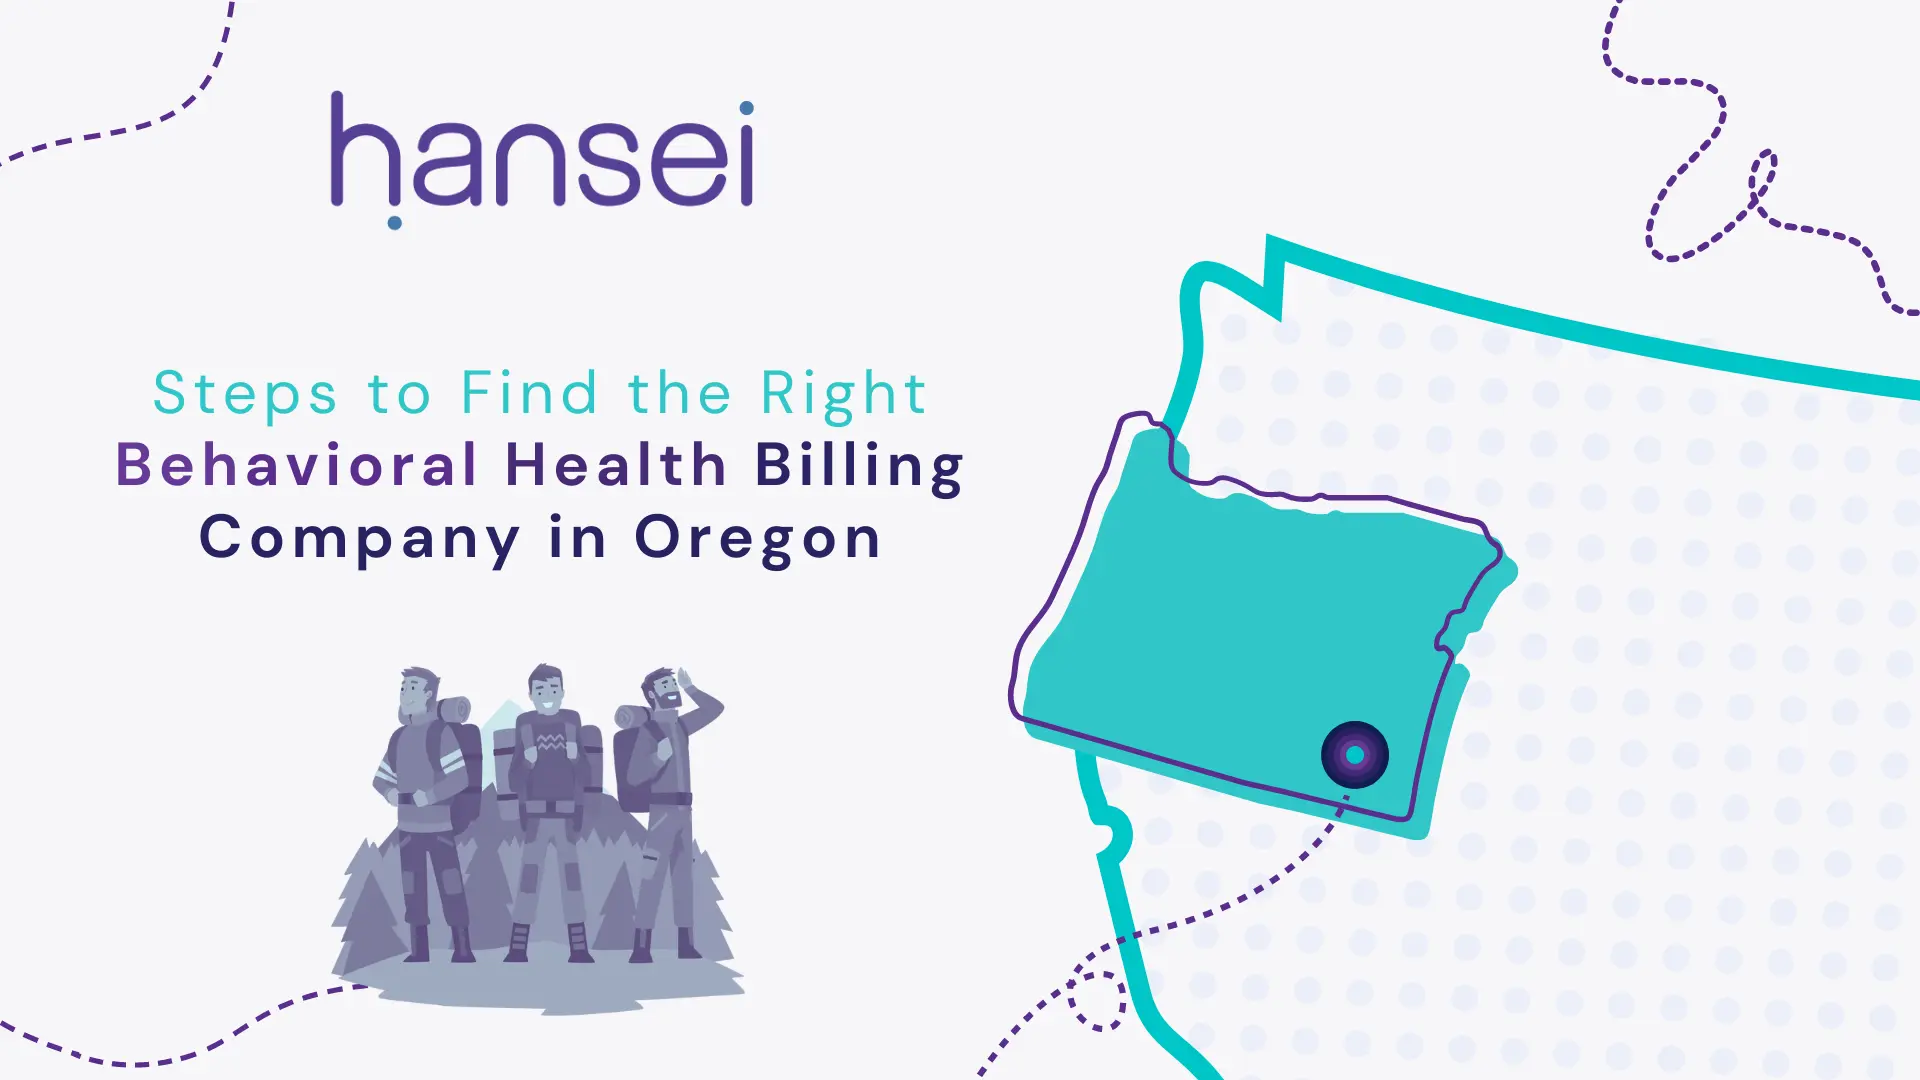 Steps to Find the Right Behavioral Health Billing Company in Oregon